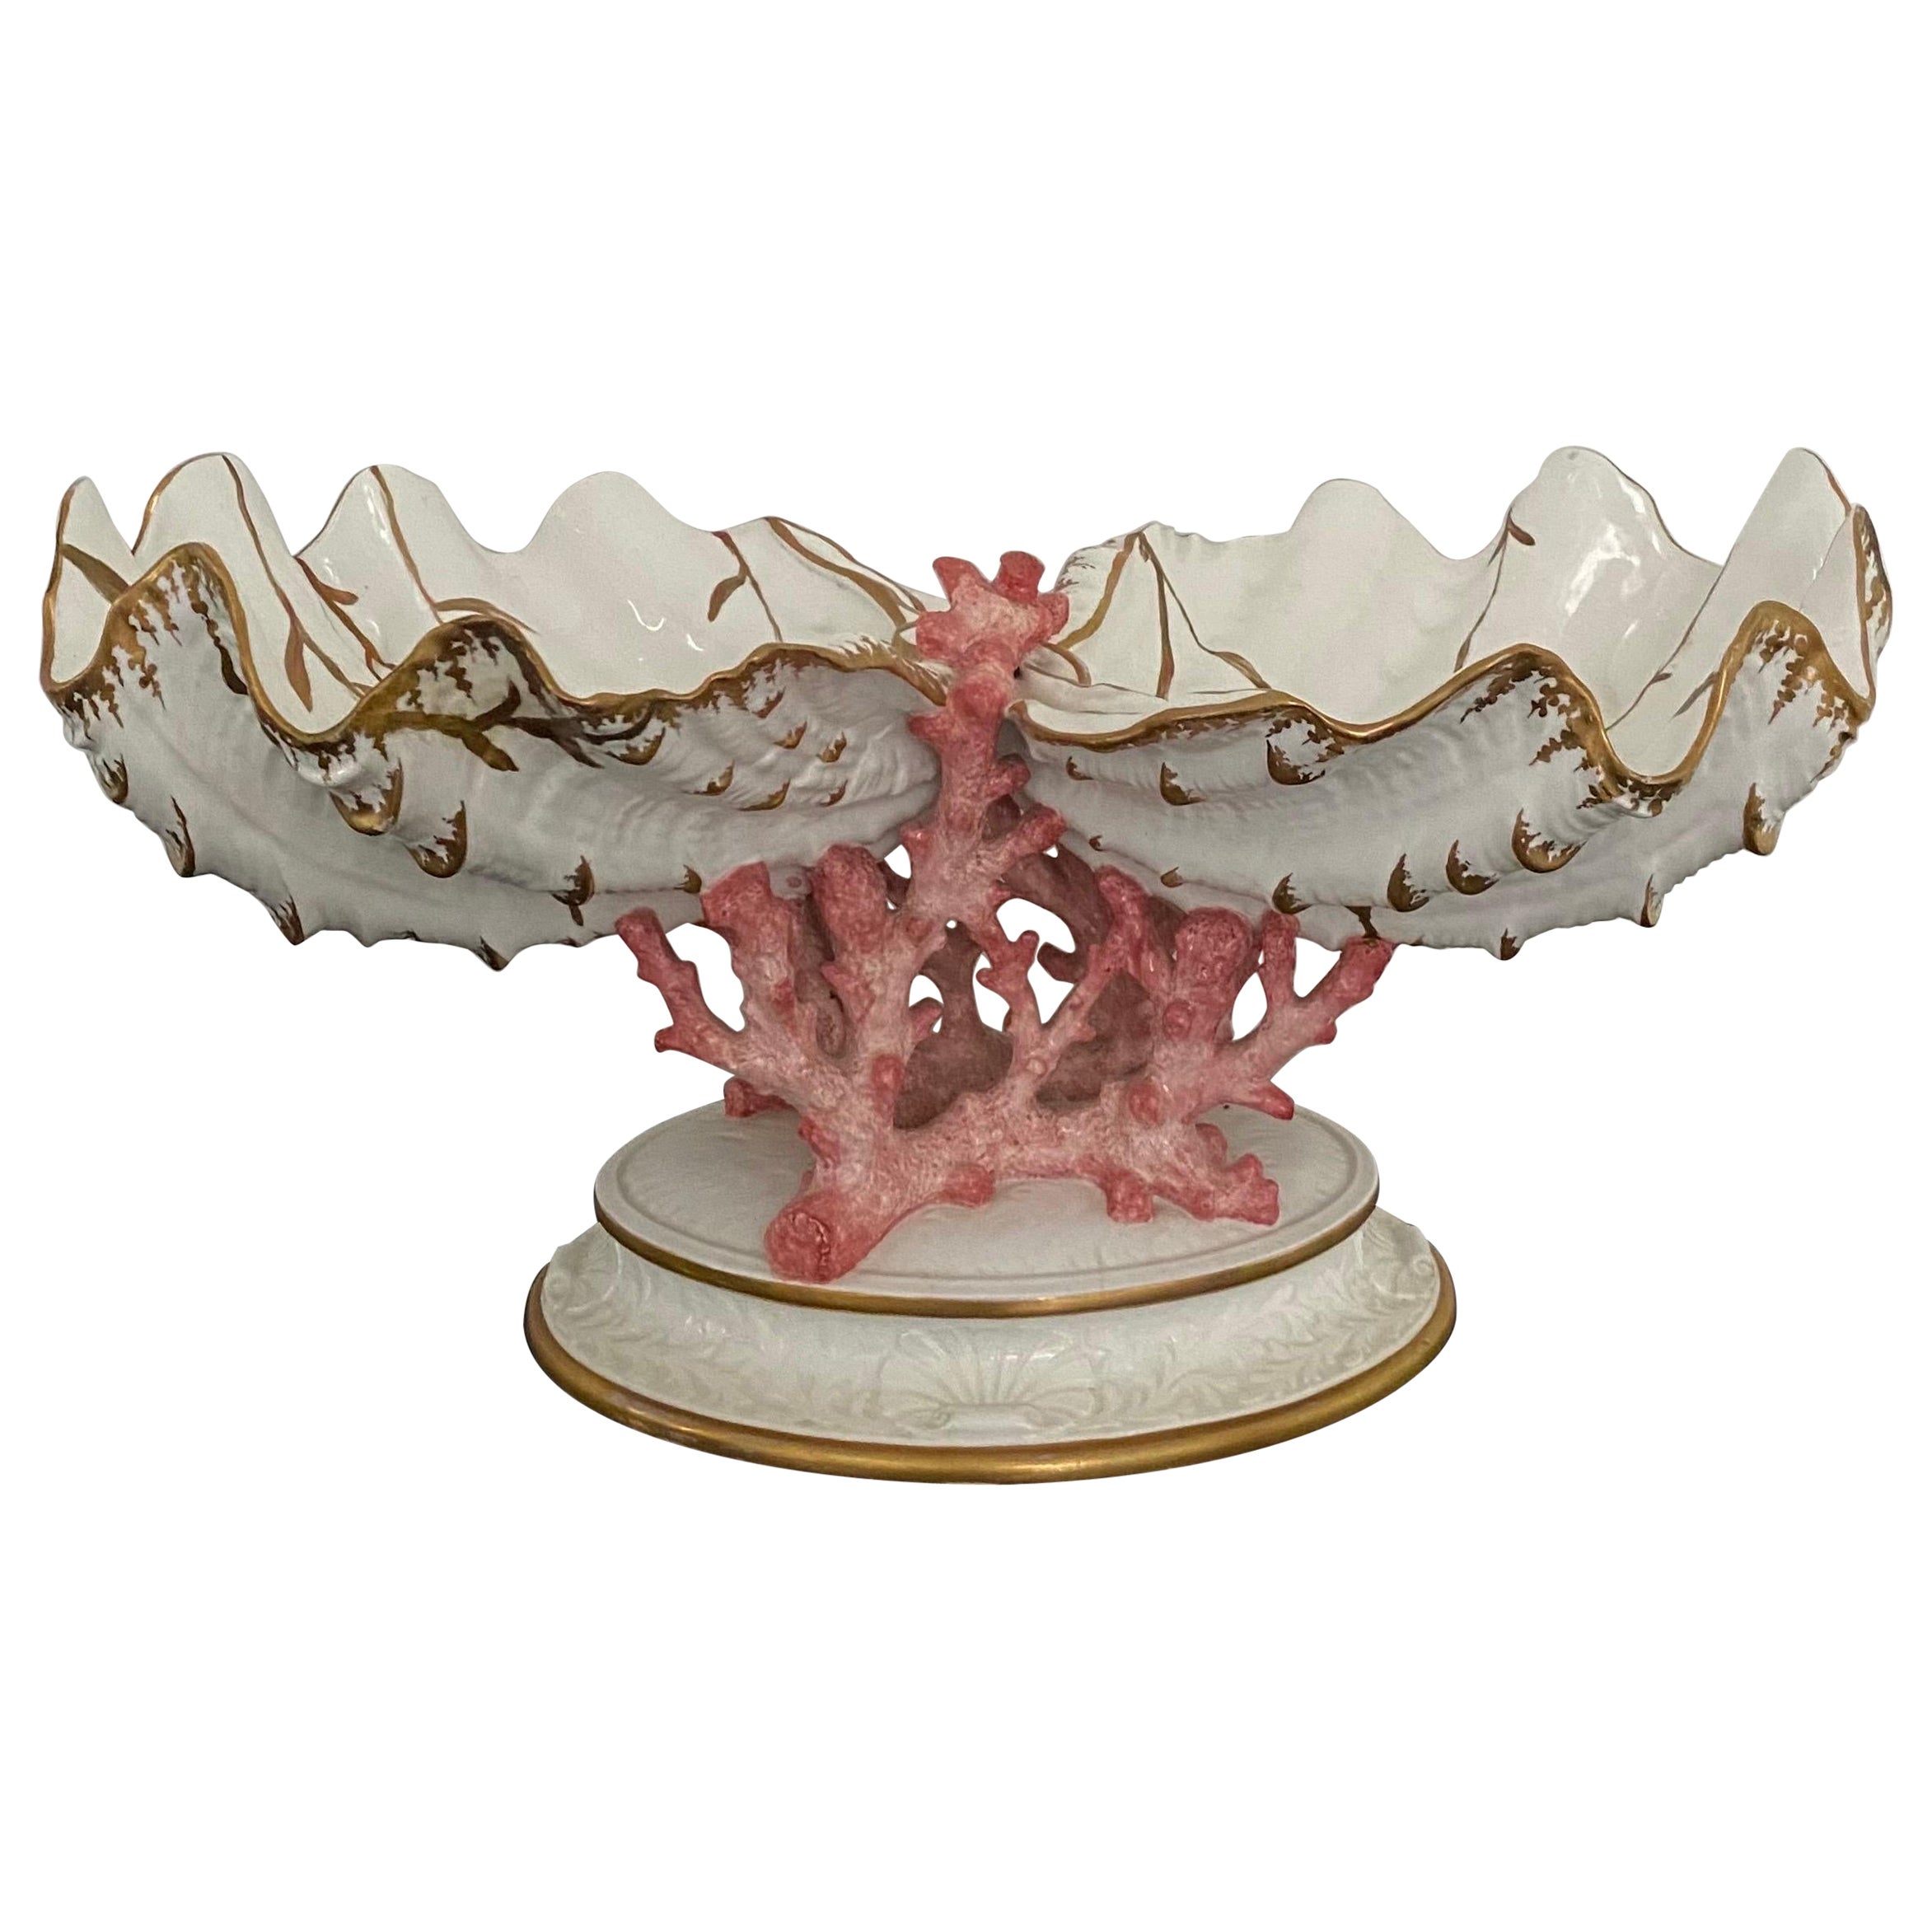 Rare Wedgwood Coral and Clamshells Decorative Pedestal Table Centerpiece Dish